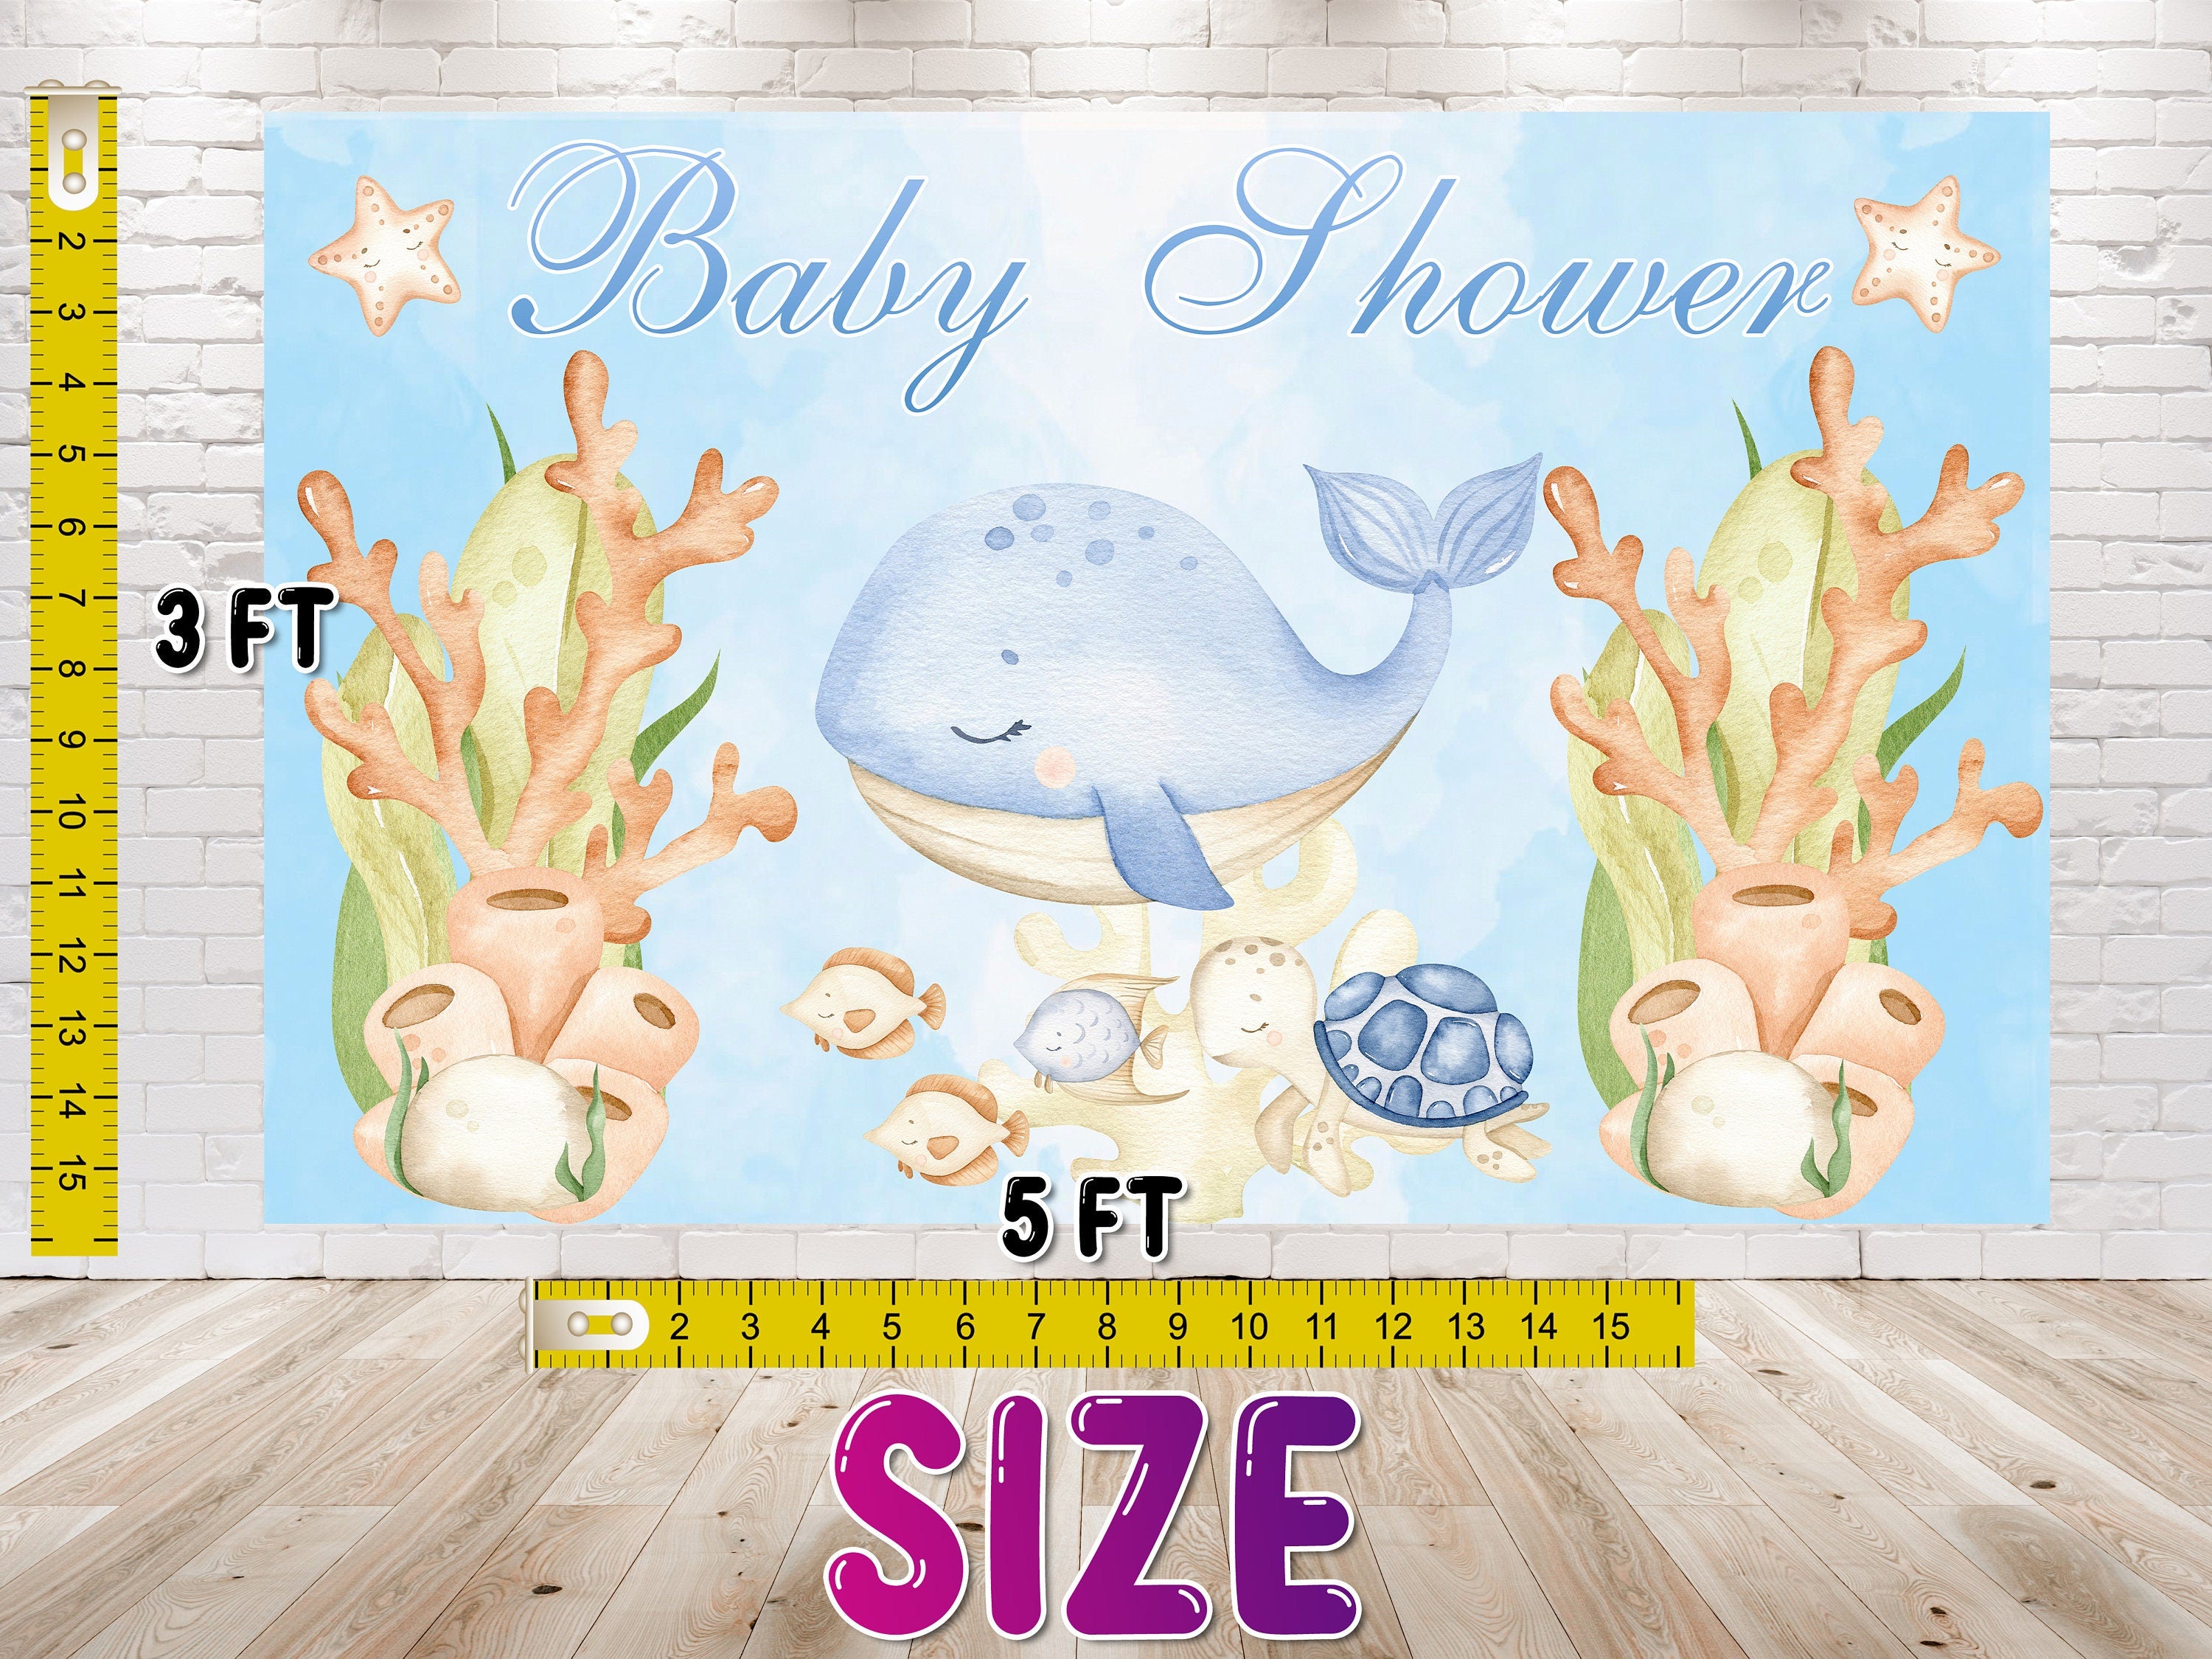 Under the Sea Baby Shower Backdrop 5x3 FT - Cute Ocean Theme Banner